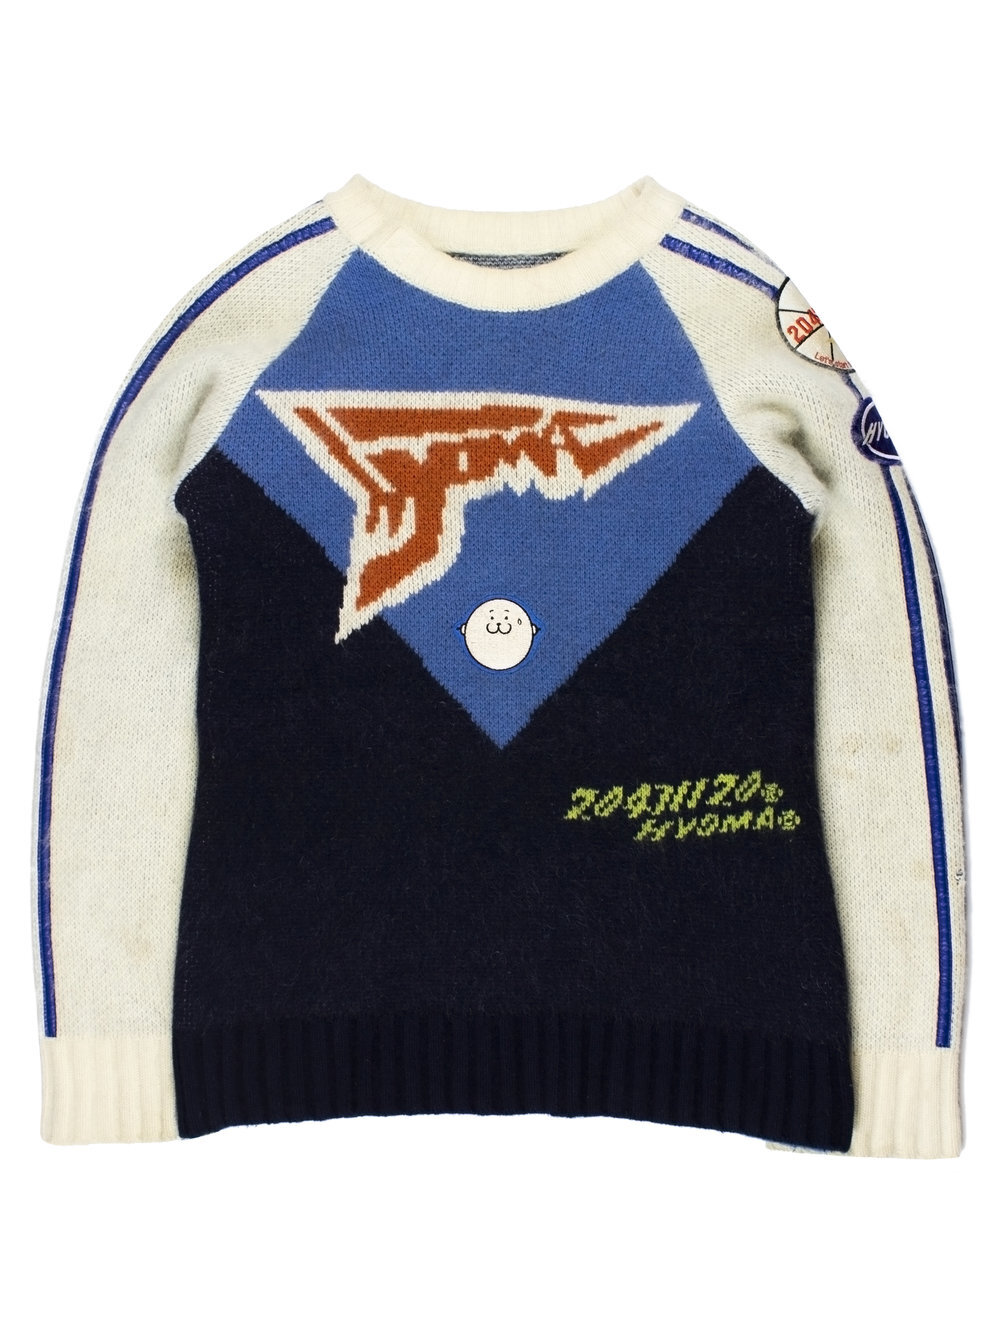 20471120 AW1999 Hyoma Racing Sweater — Middleman Store